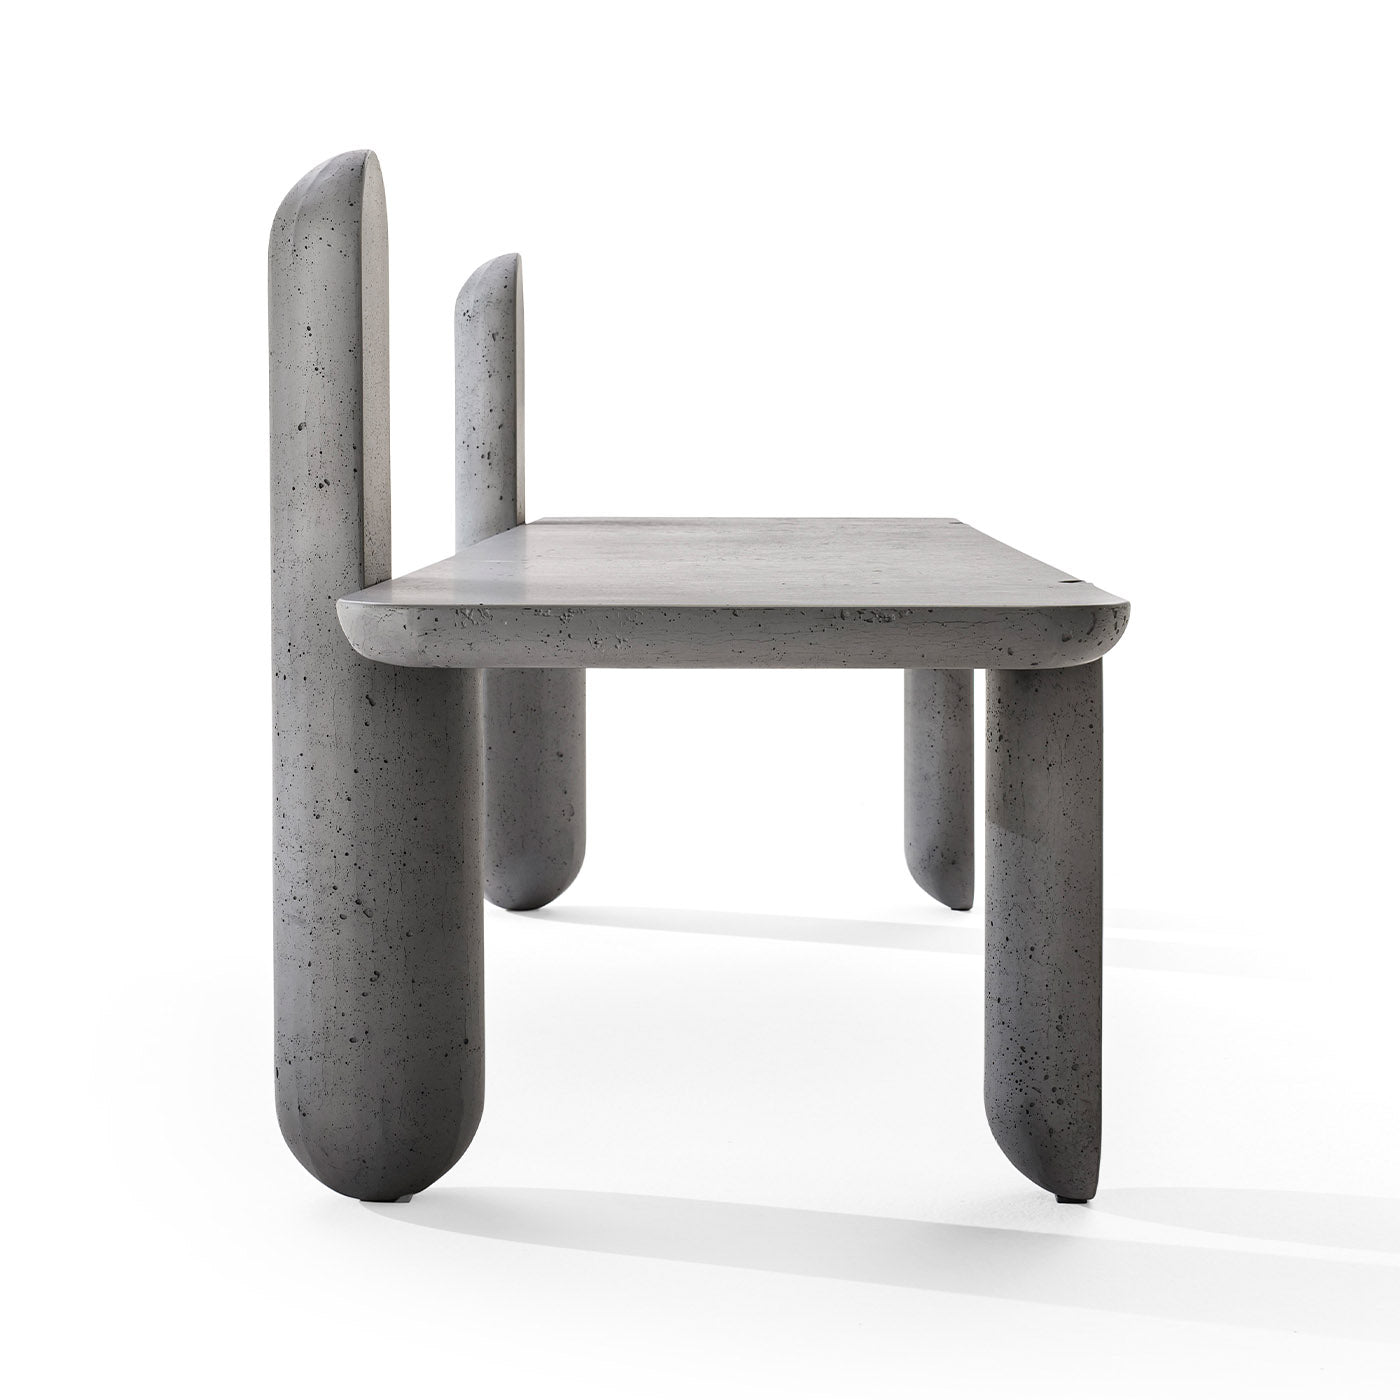 Lido Bench by Parisotto and Formenton  - Alternative view 2